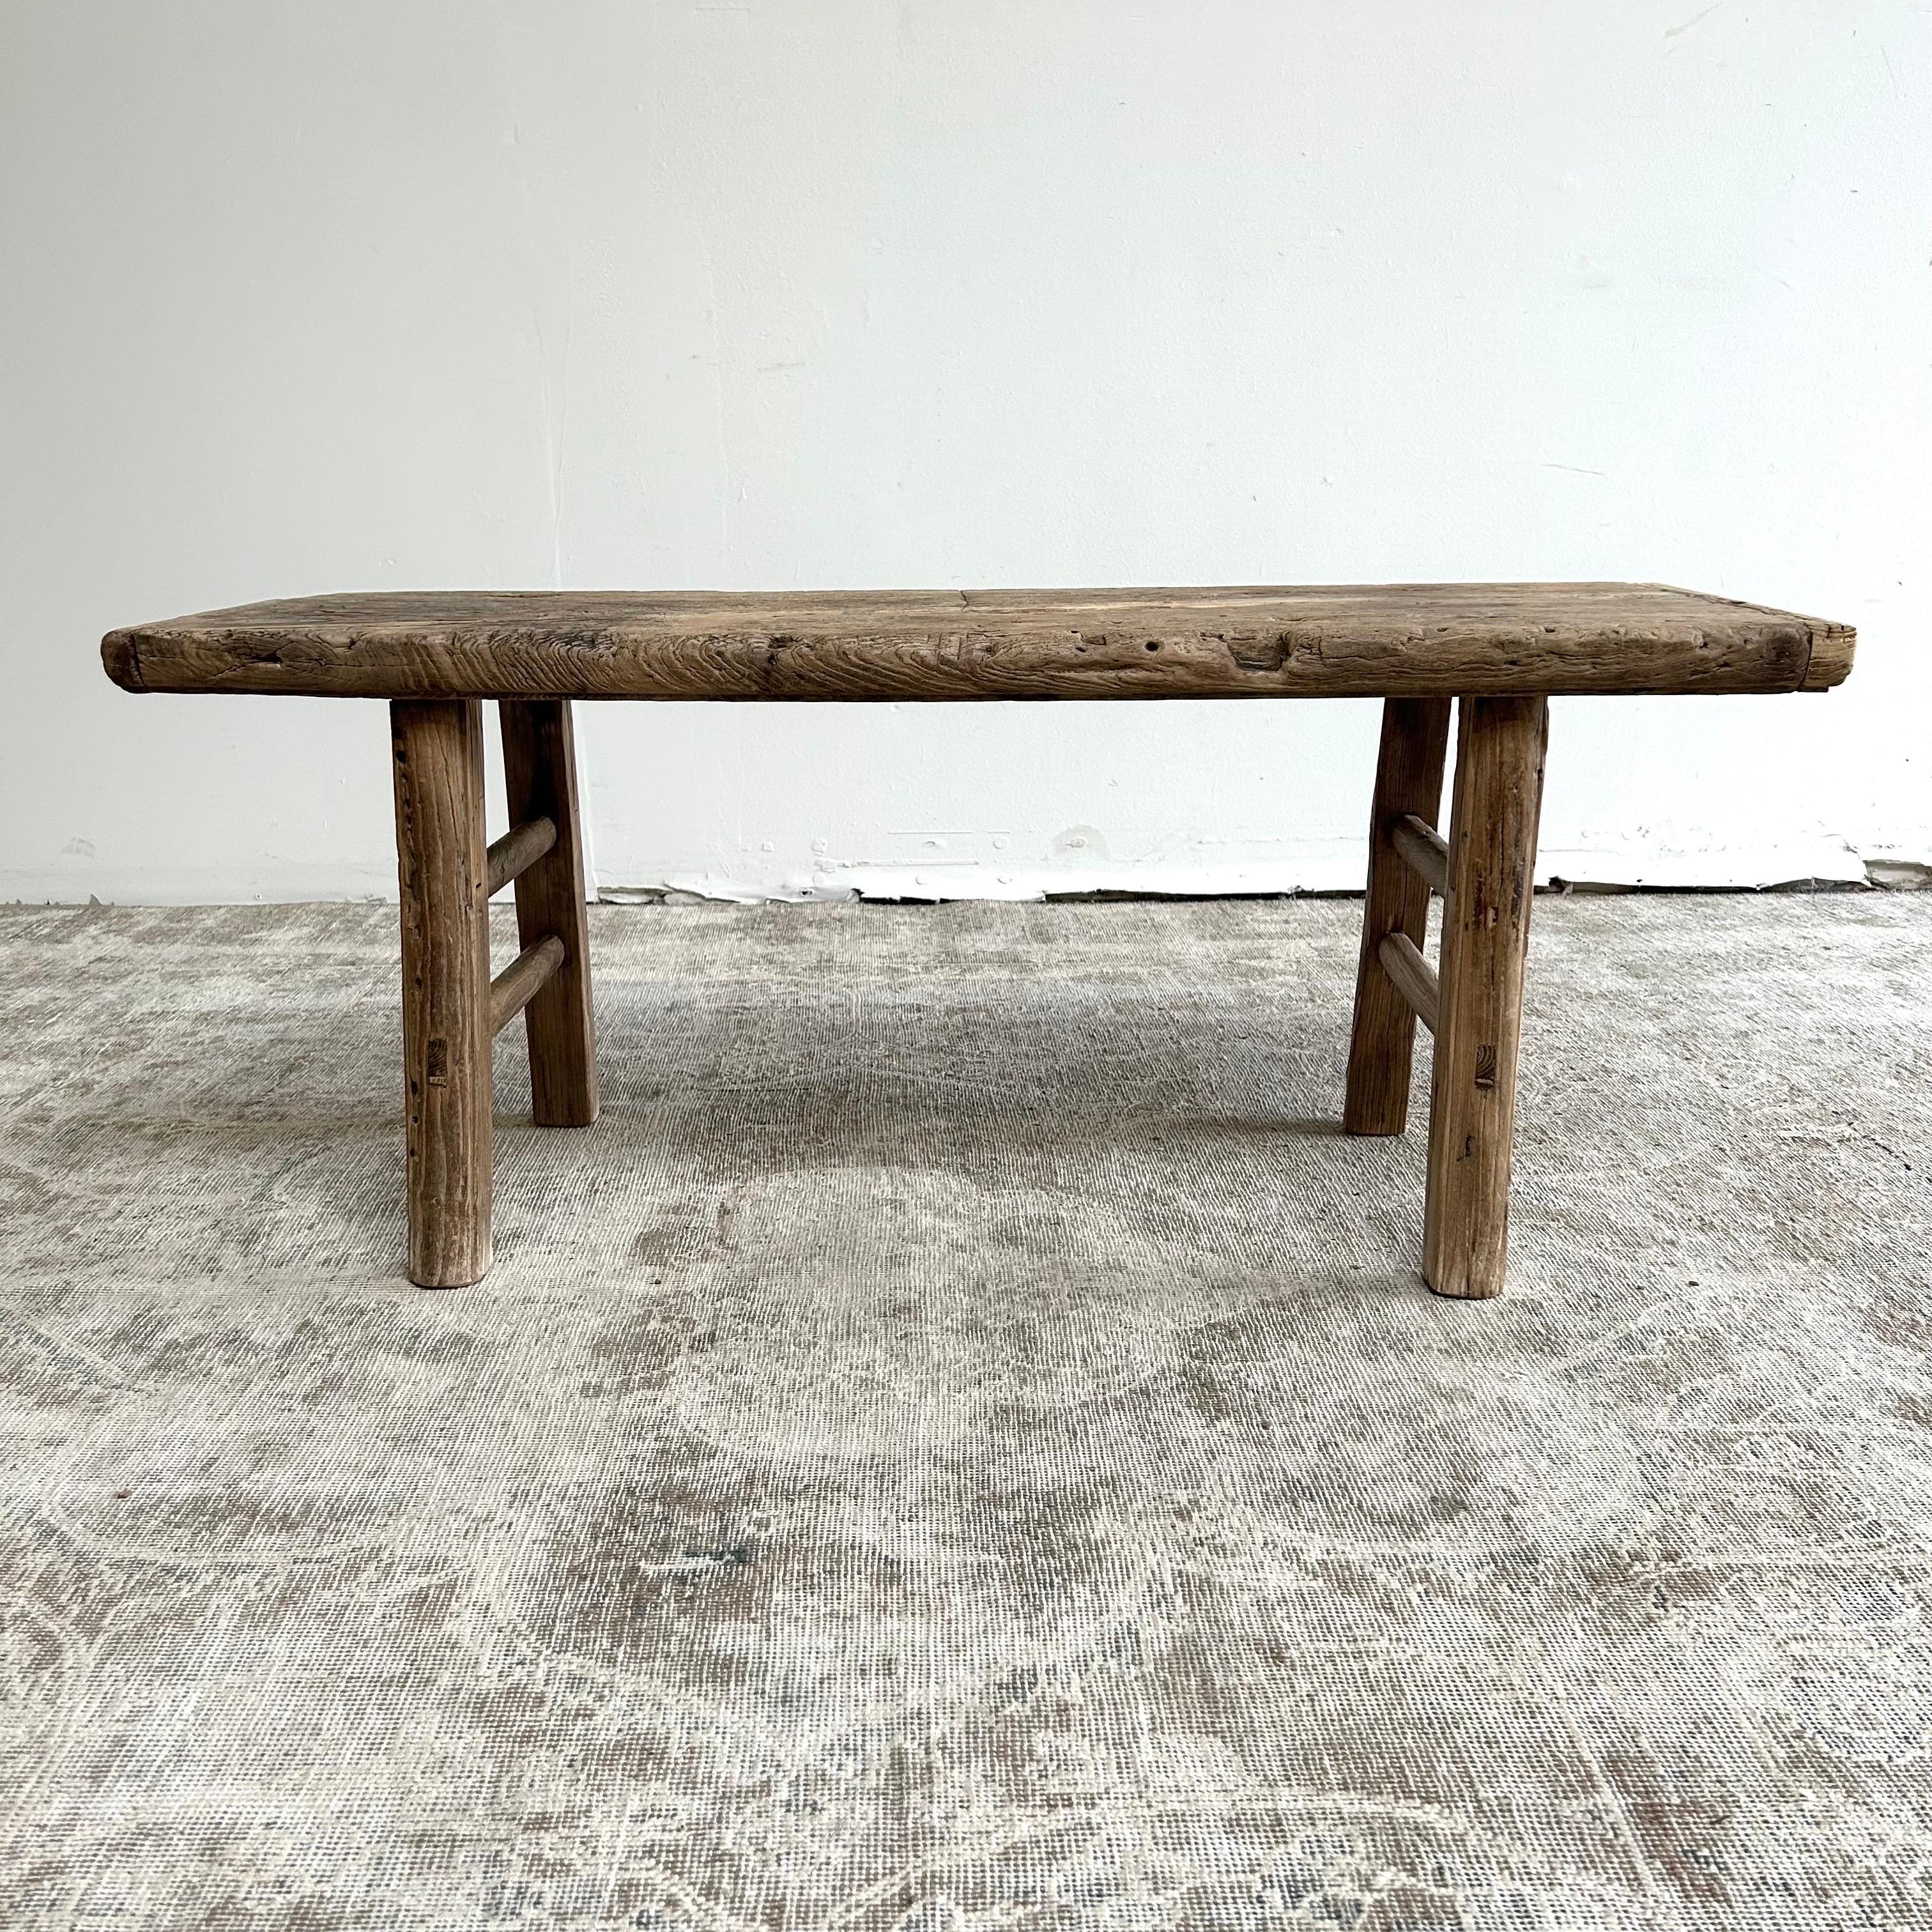 Vintage antique elm wood coffee table with beautiful antique weathered patina top. These are the real vintage antique elm wood coffee table! Beautiful antique patina, with weathering and age, these are solid and sturdy ready for daily use, use as a